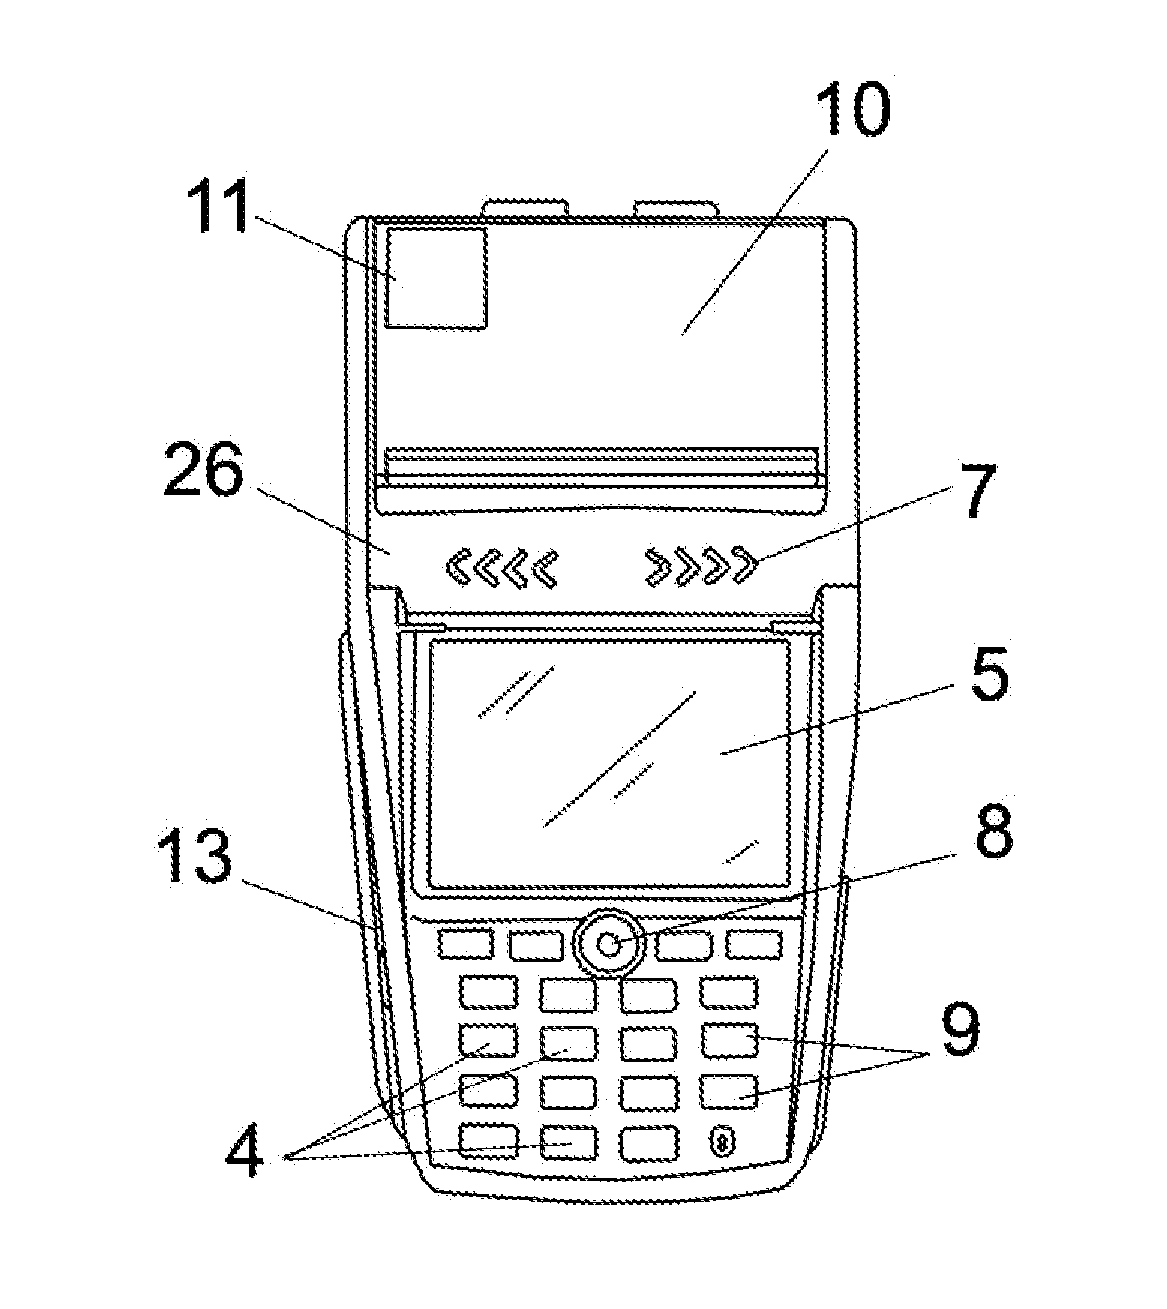 Multi-communication assisted portable terminal